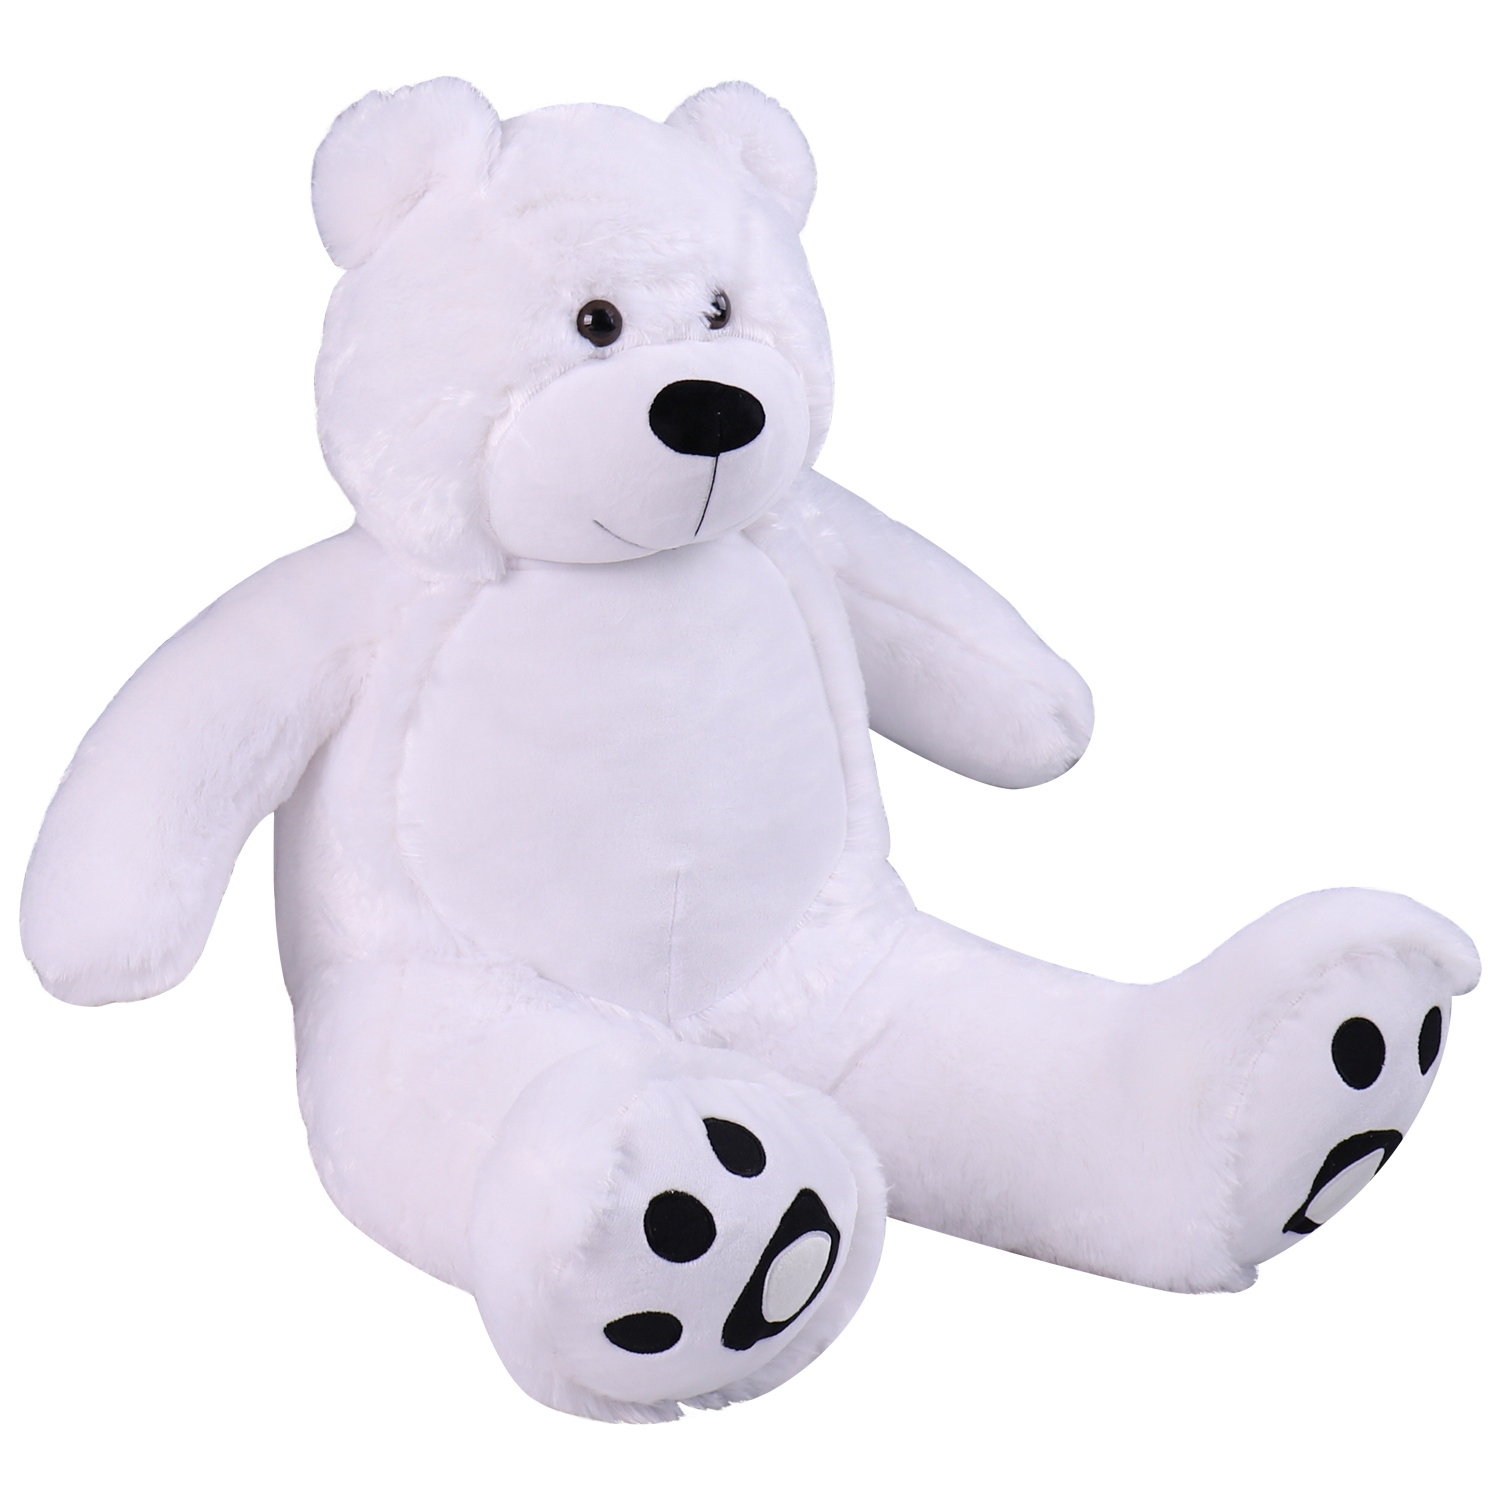 WOWMAX 3 Foot Giant Teddy Bear Daney Cuddly Stuffed Plush Animals Teddy Bear Toy Doll for Birthday Christmas White 36 Inches - image 1 of 5